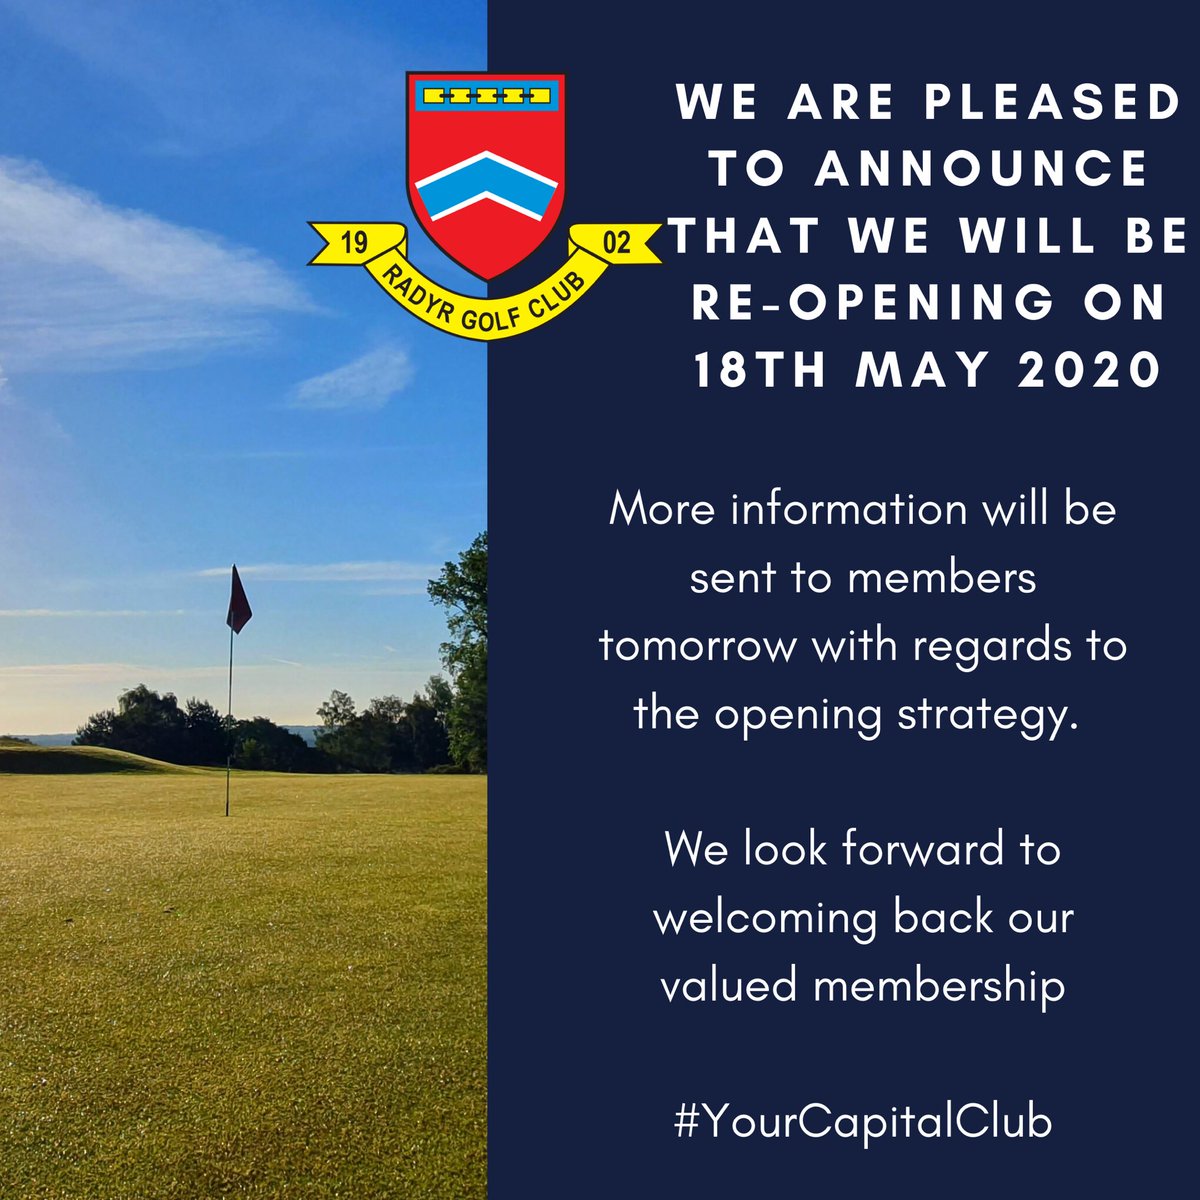 Some good news for our members following the announcement by @wales_golf which can be found here ⬇️ walesgolf.org/covid-19/ Details of the reopening strategy will be sent to all members via email tomorrow. #YourCapitalClub